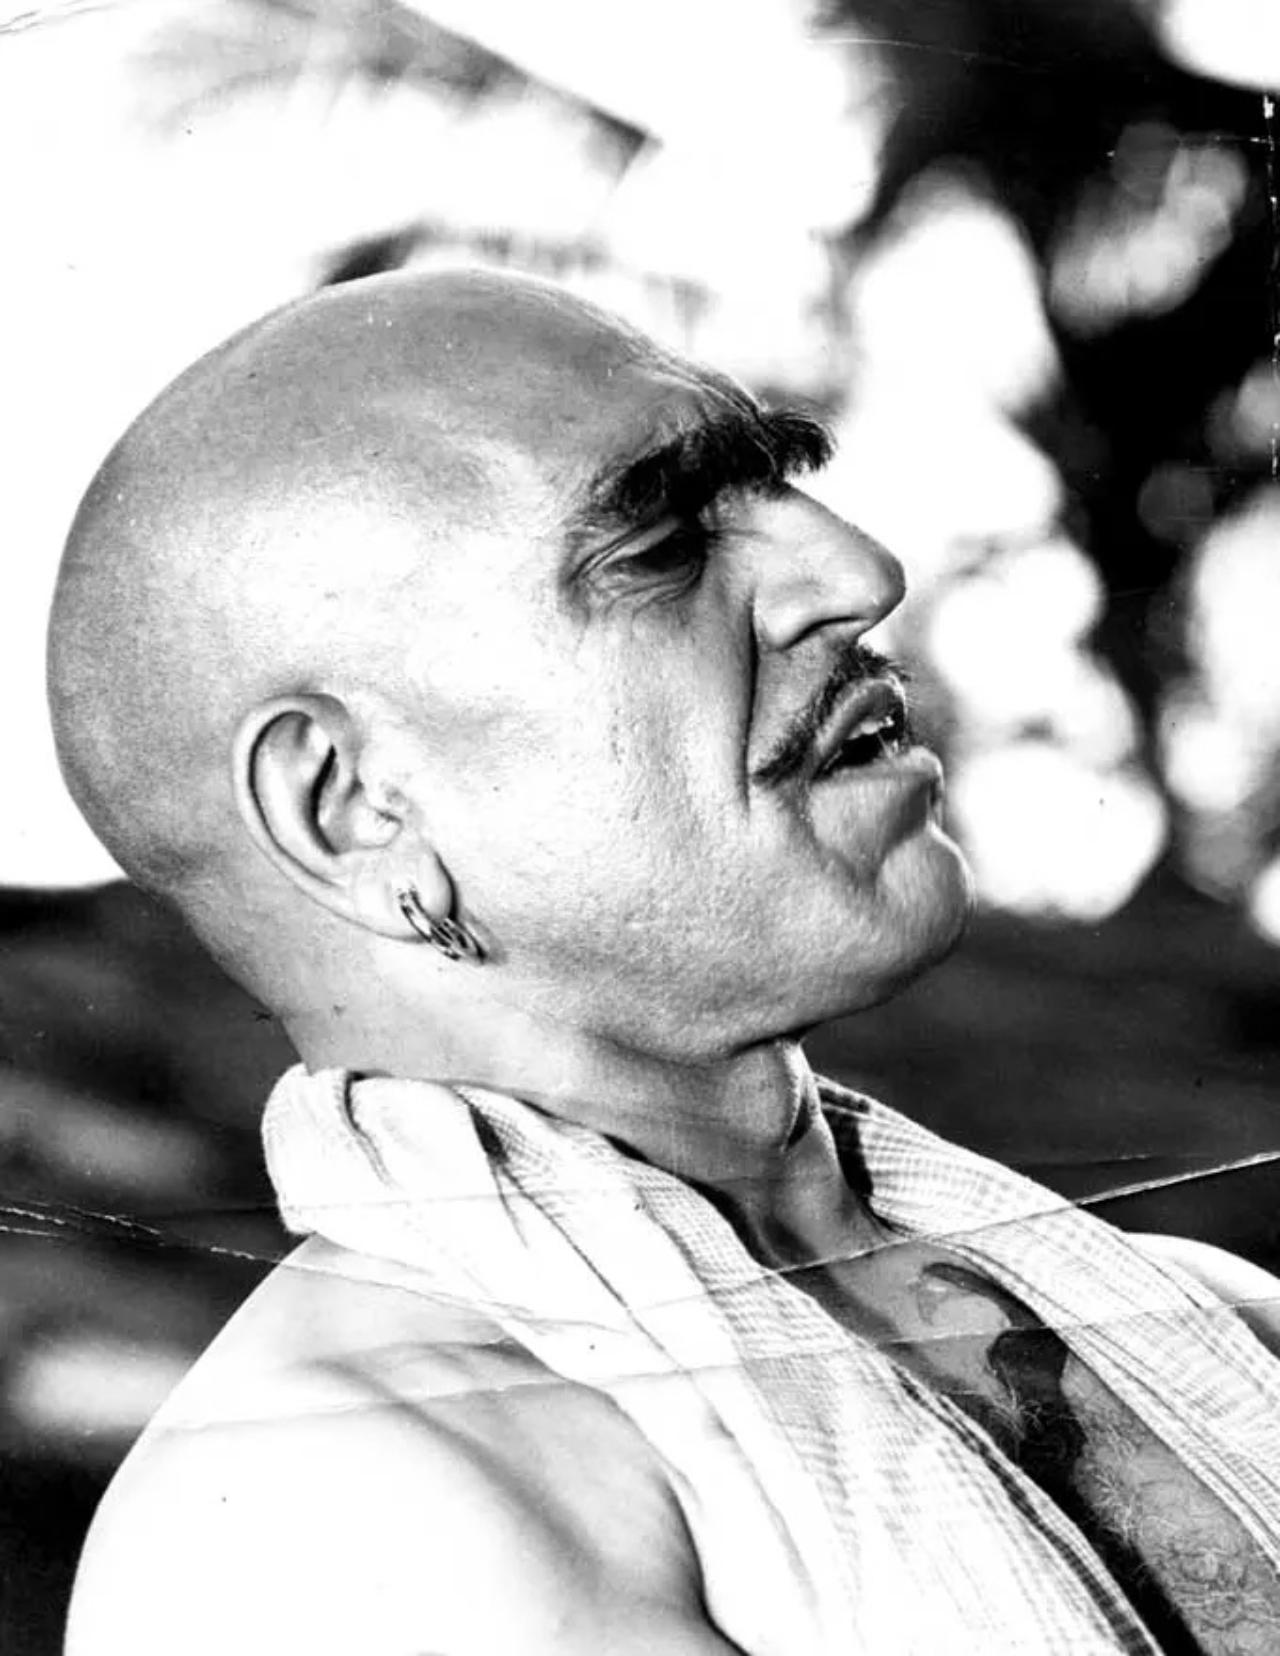 Amrish Puri was suffering from myelodysplastic syndrome, a rare kind of blood cancer, and had undergone some brain invasive surgery for his condition after he was admitted to the Hinduja hospital in 2004